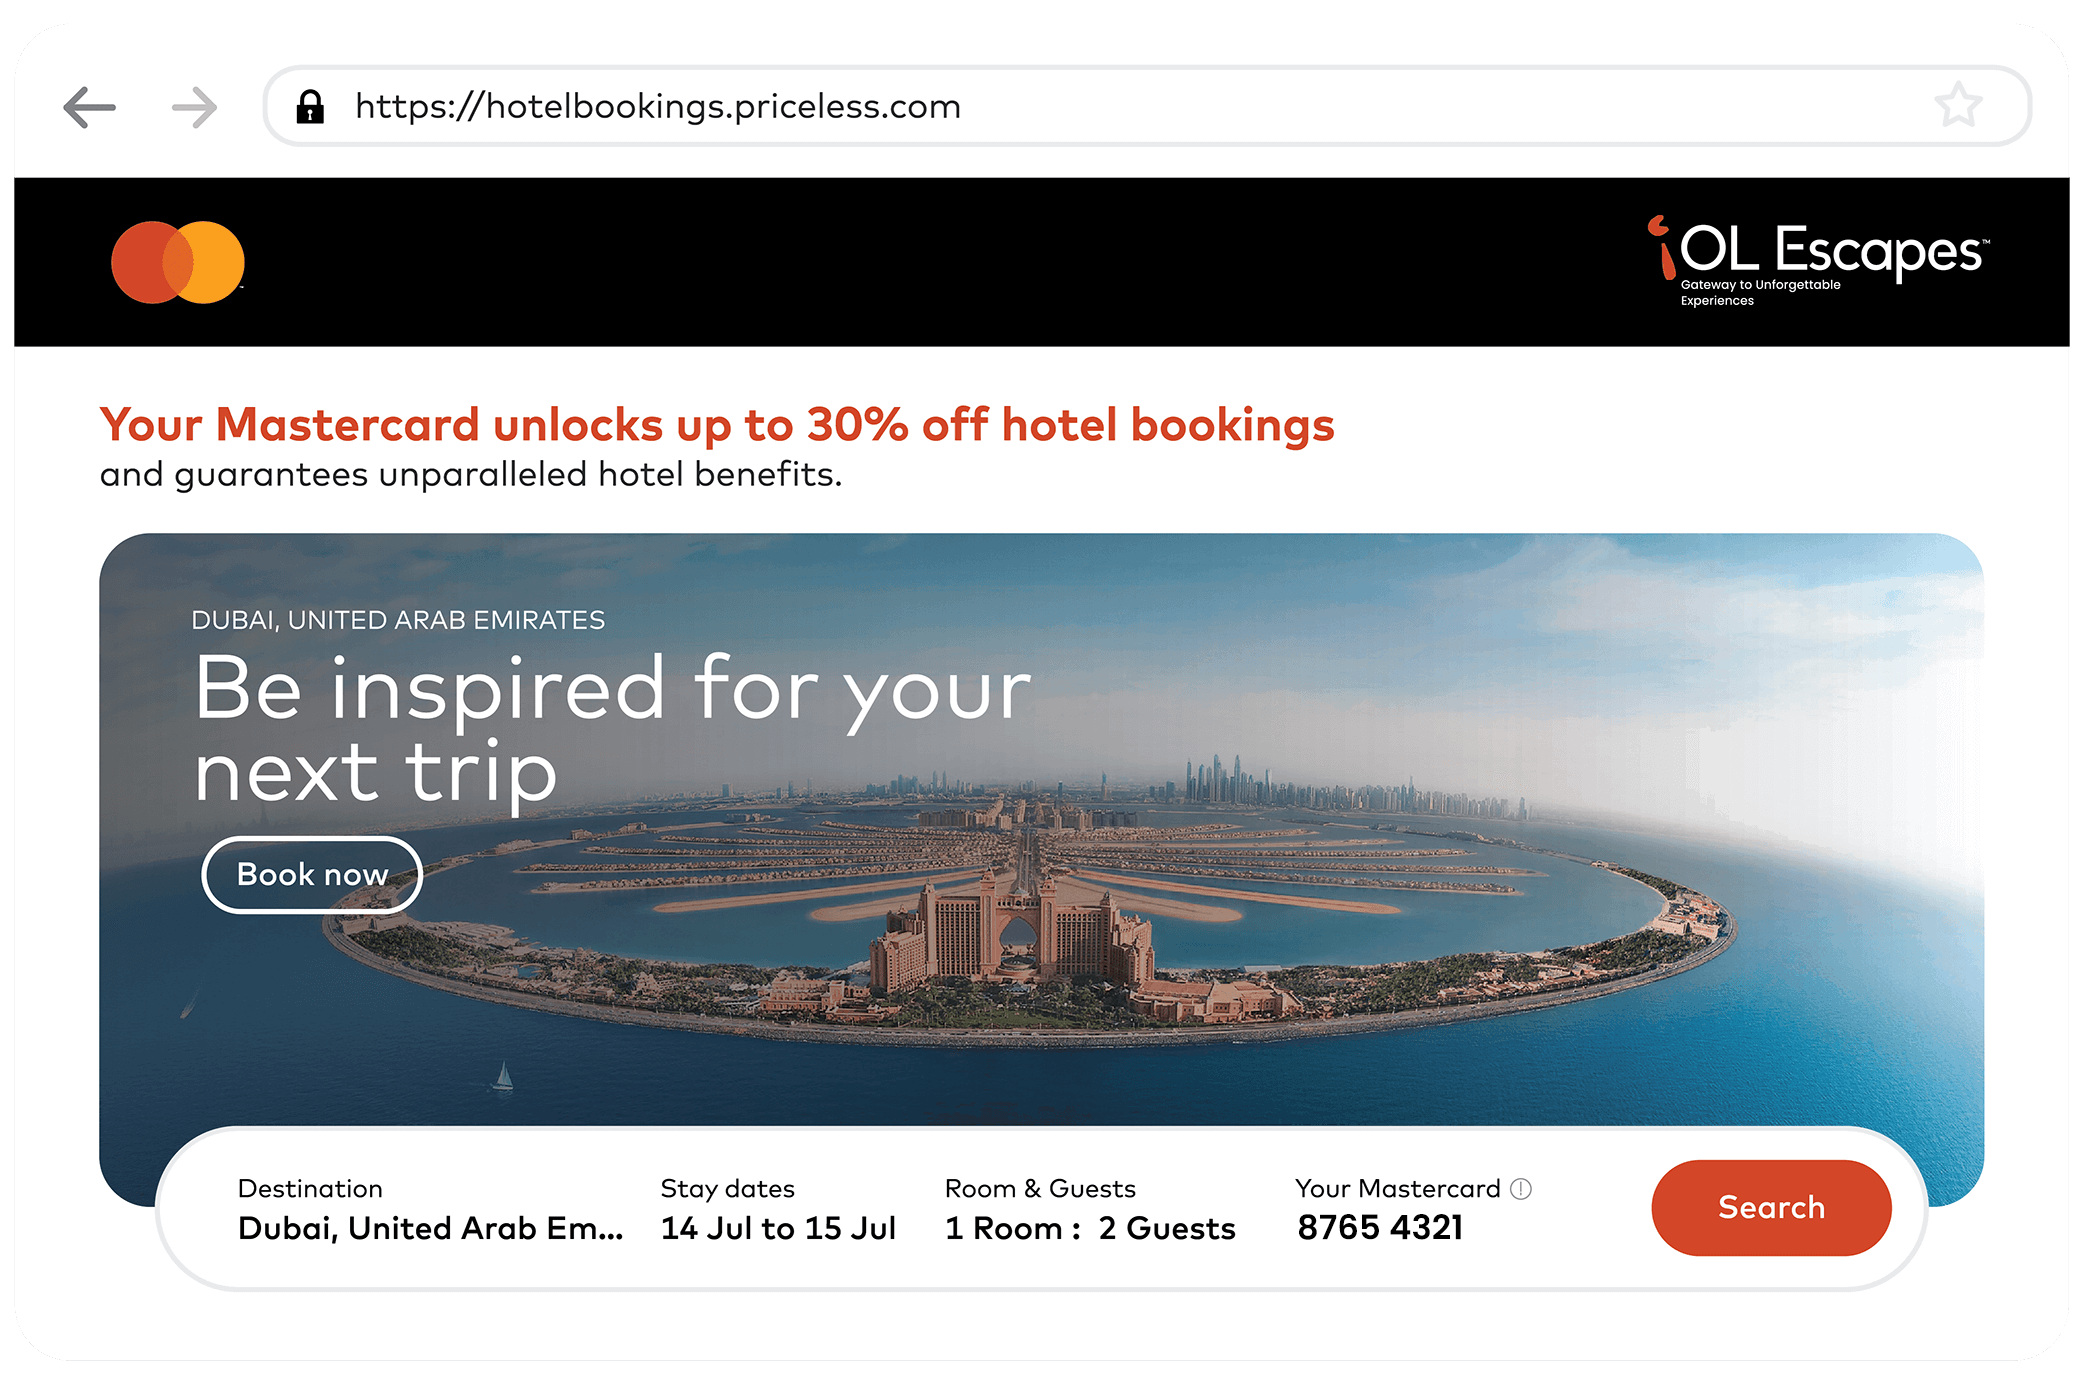 iOL Escapes - Mastercard Priceless Hotel Bookings